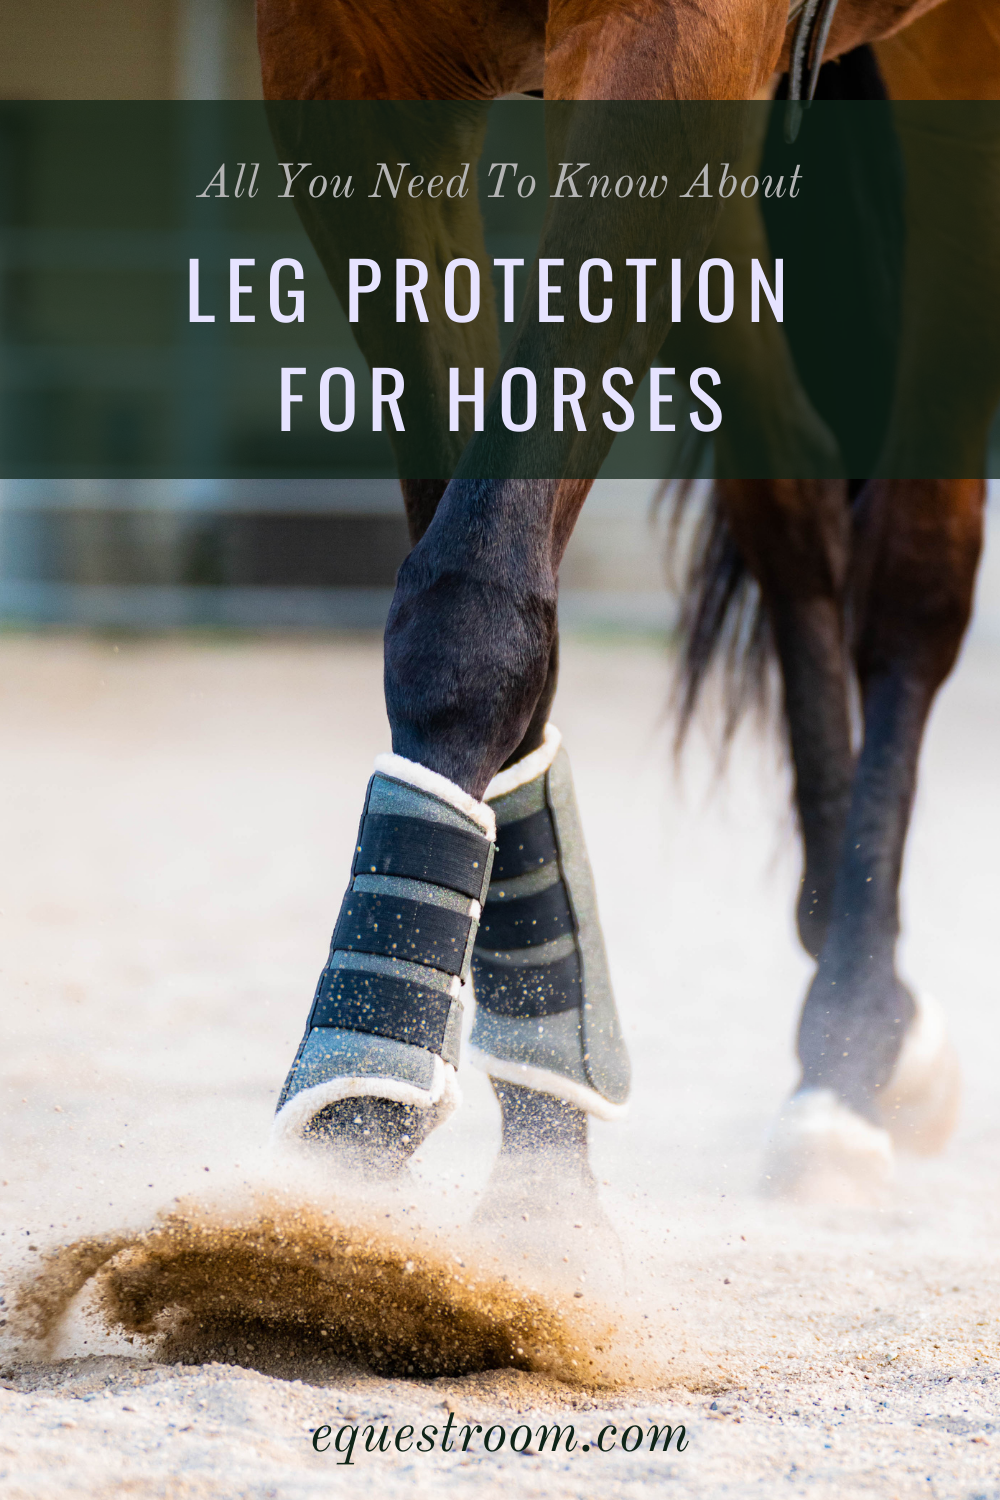 LEG PROTECTION FOR HORSES